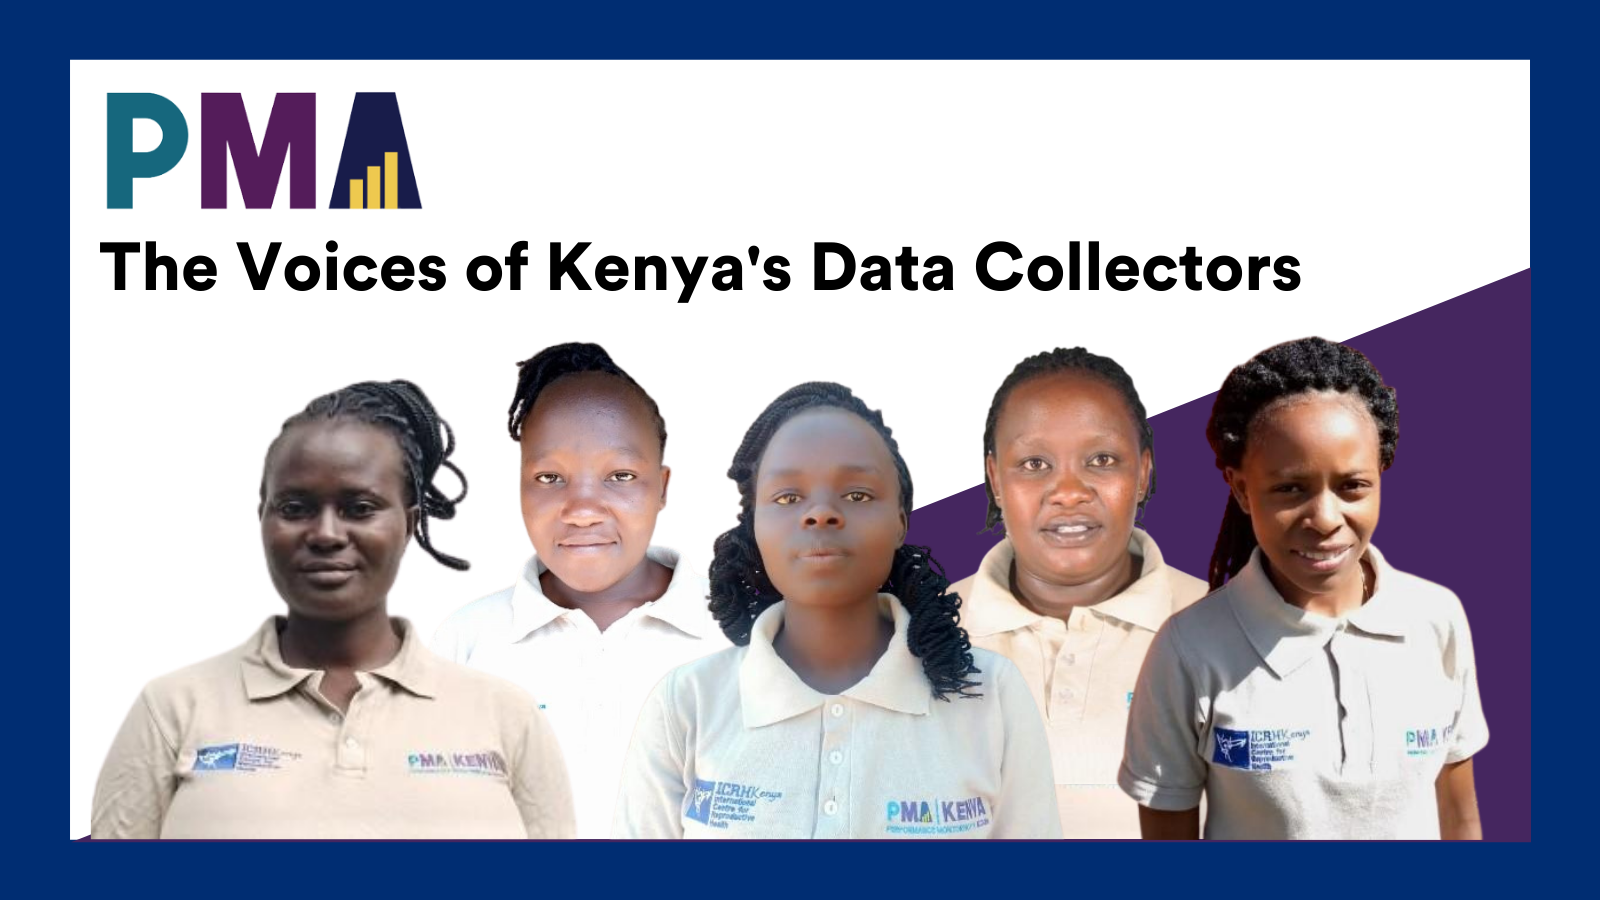 Hear from PMA's female data collectors in Kenya